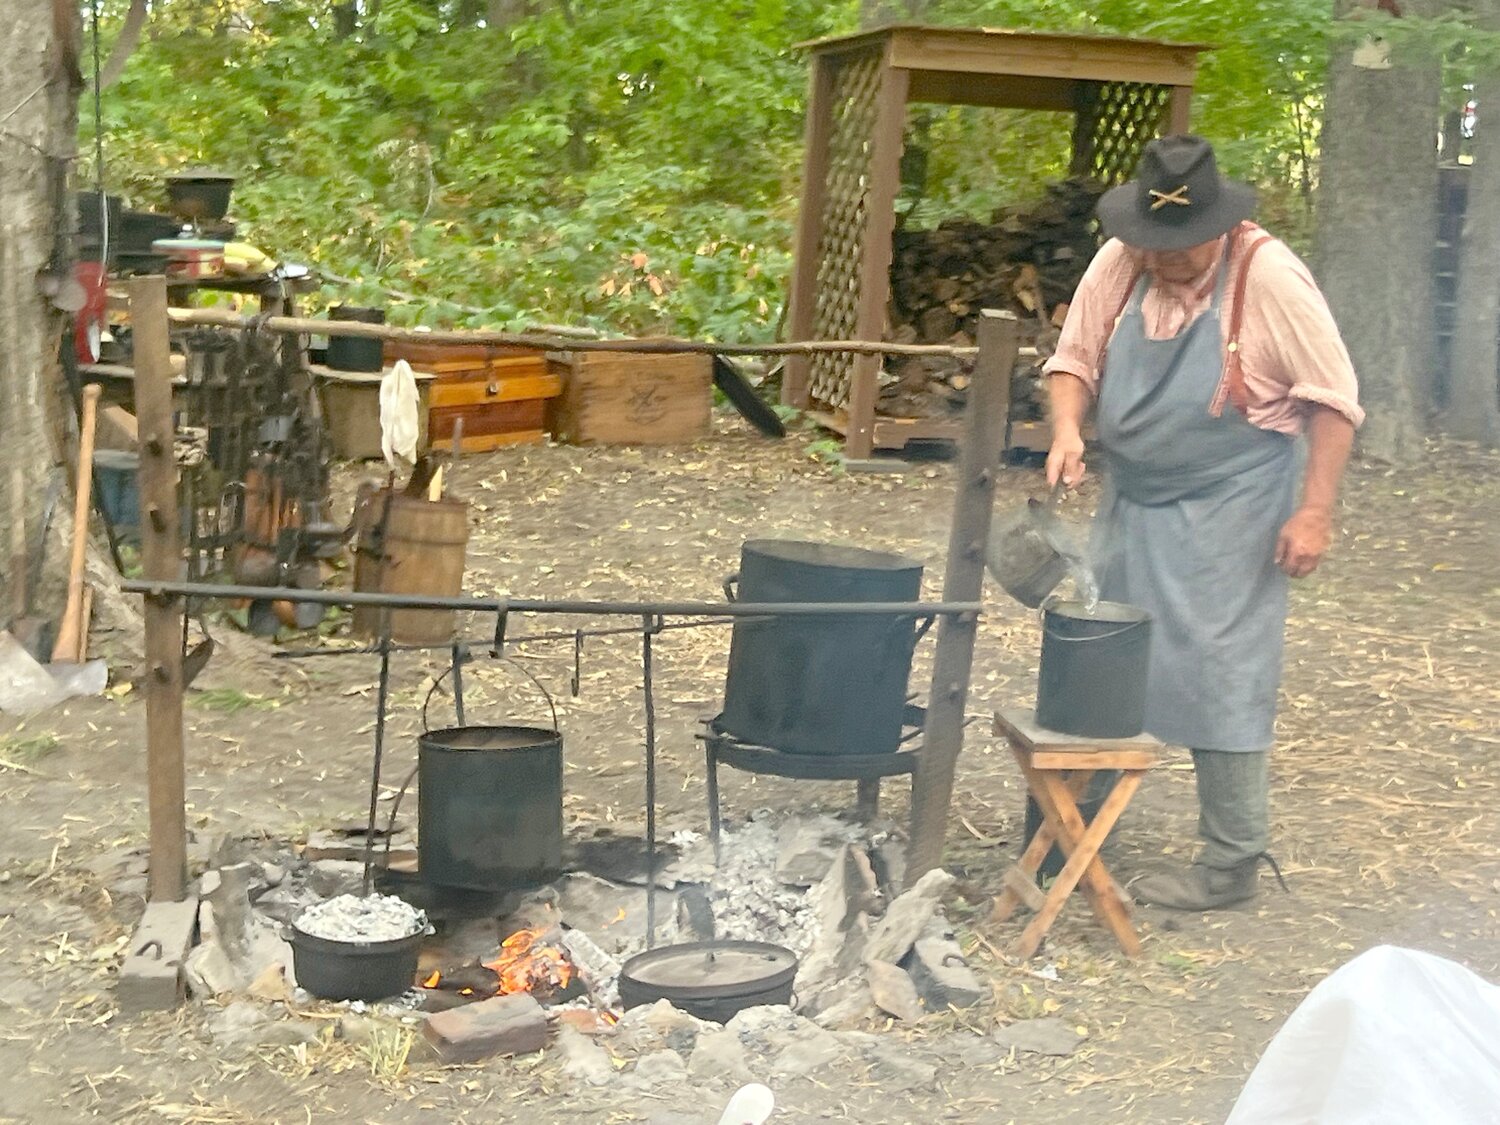 Spencer Johnson tended his kitchen as he prepared lunch on Sunday at the Civil War Weekend.